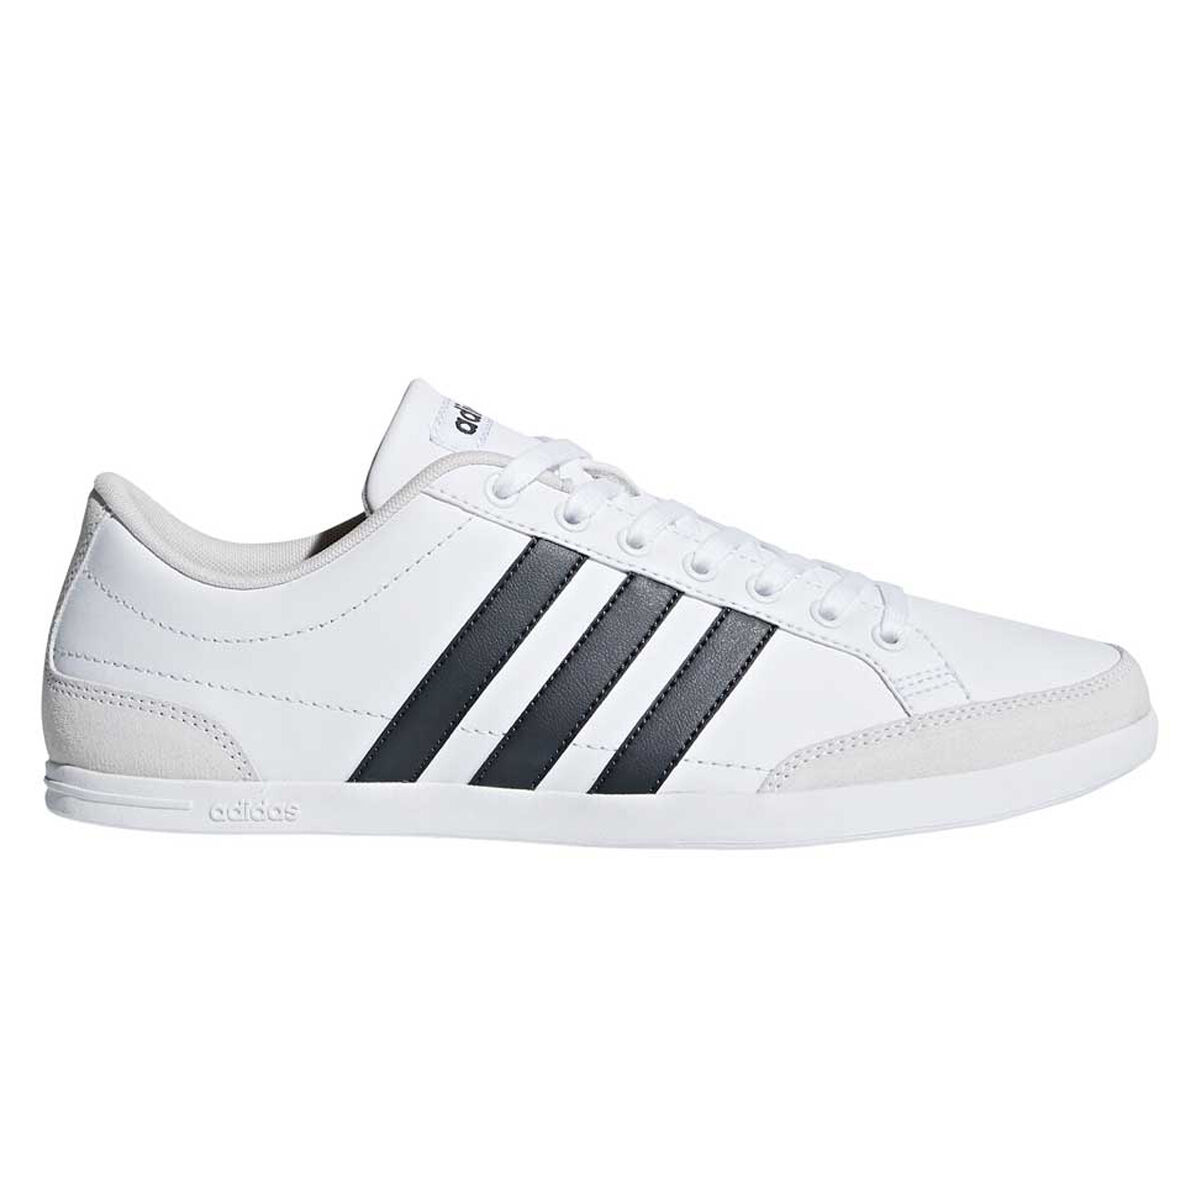 adidas caflaire mens casual shoes